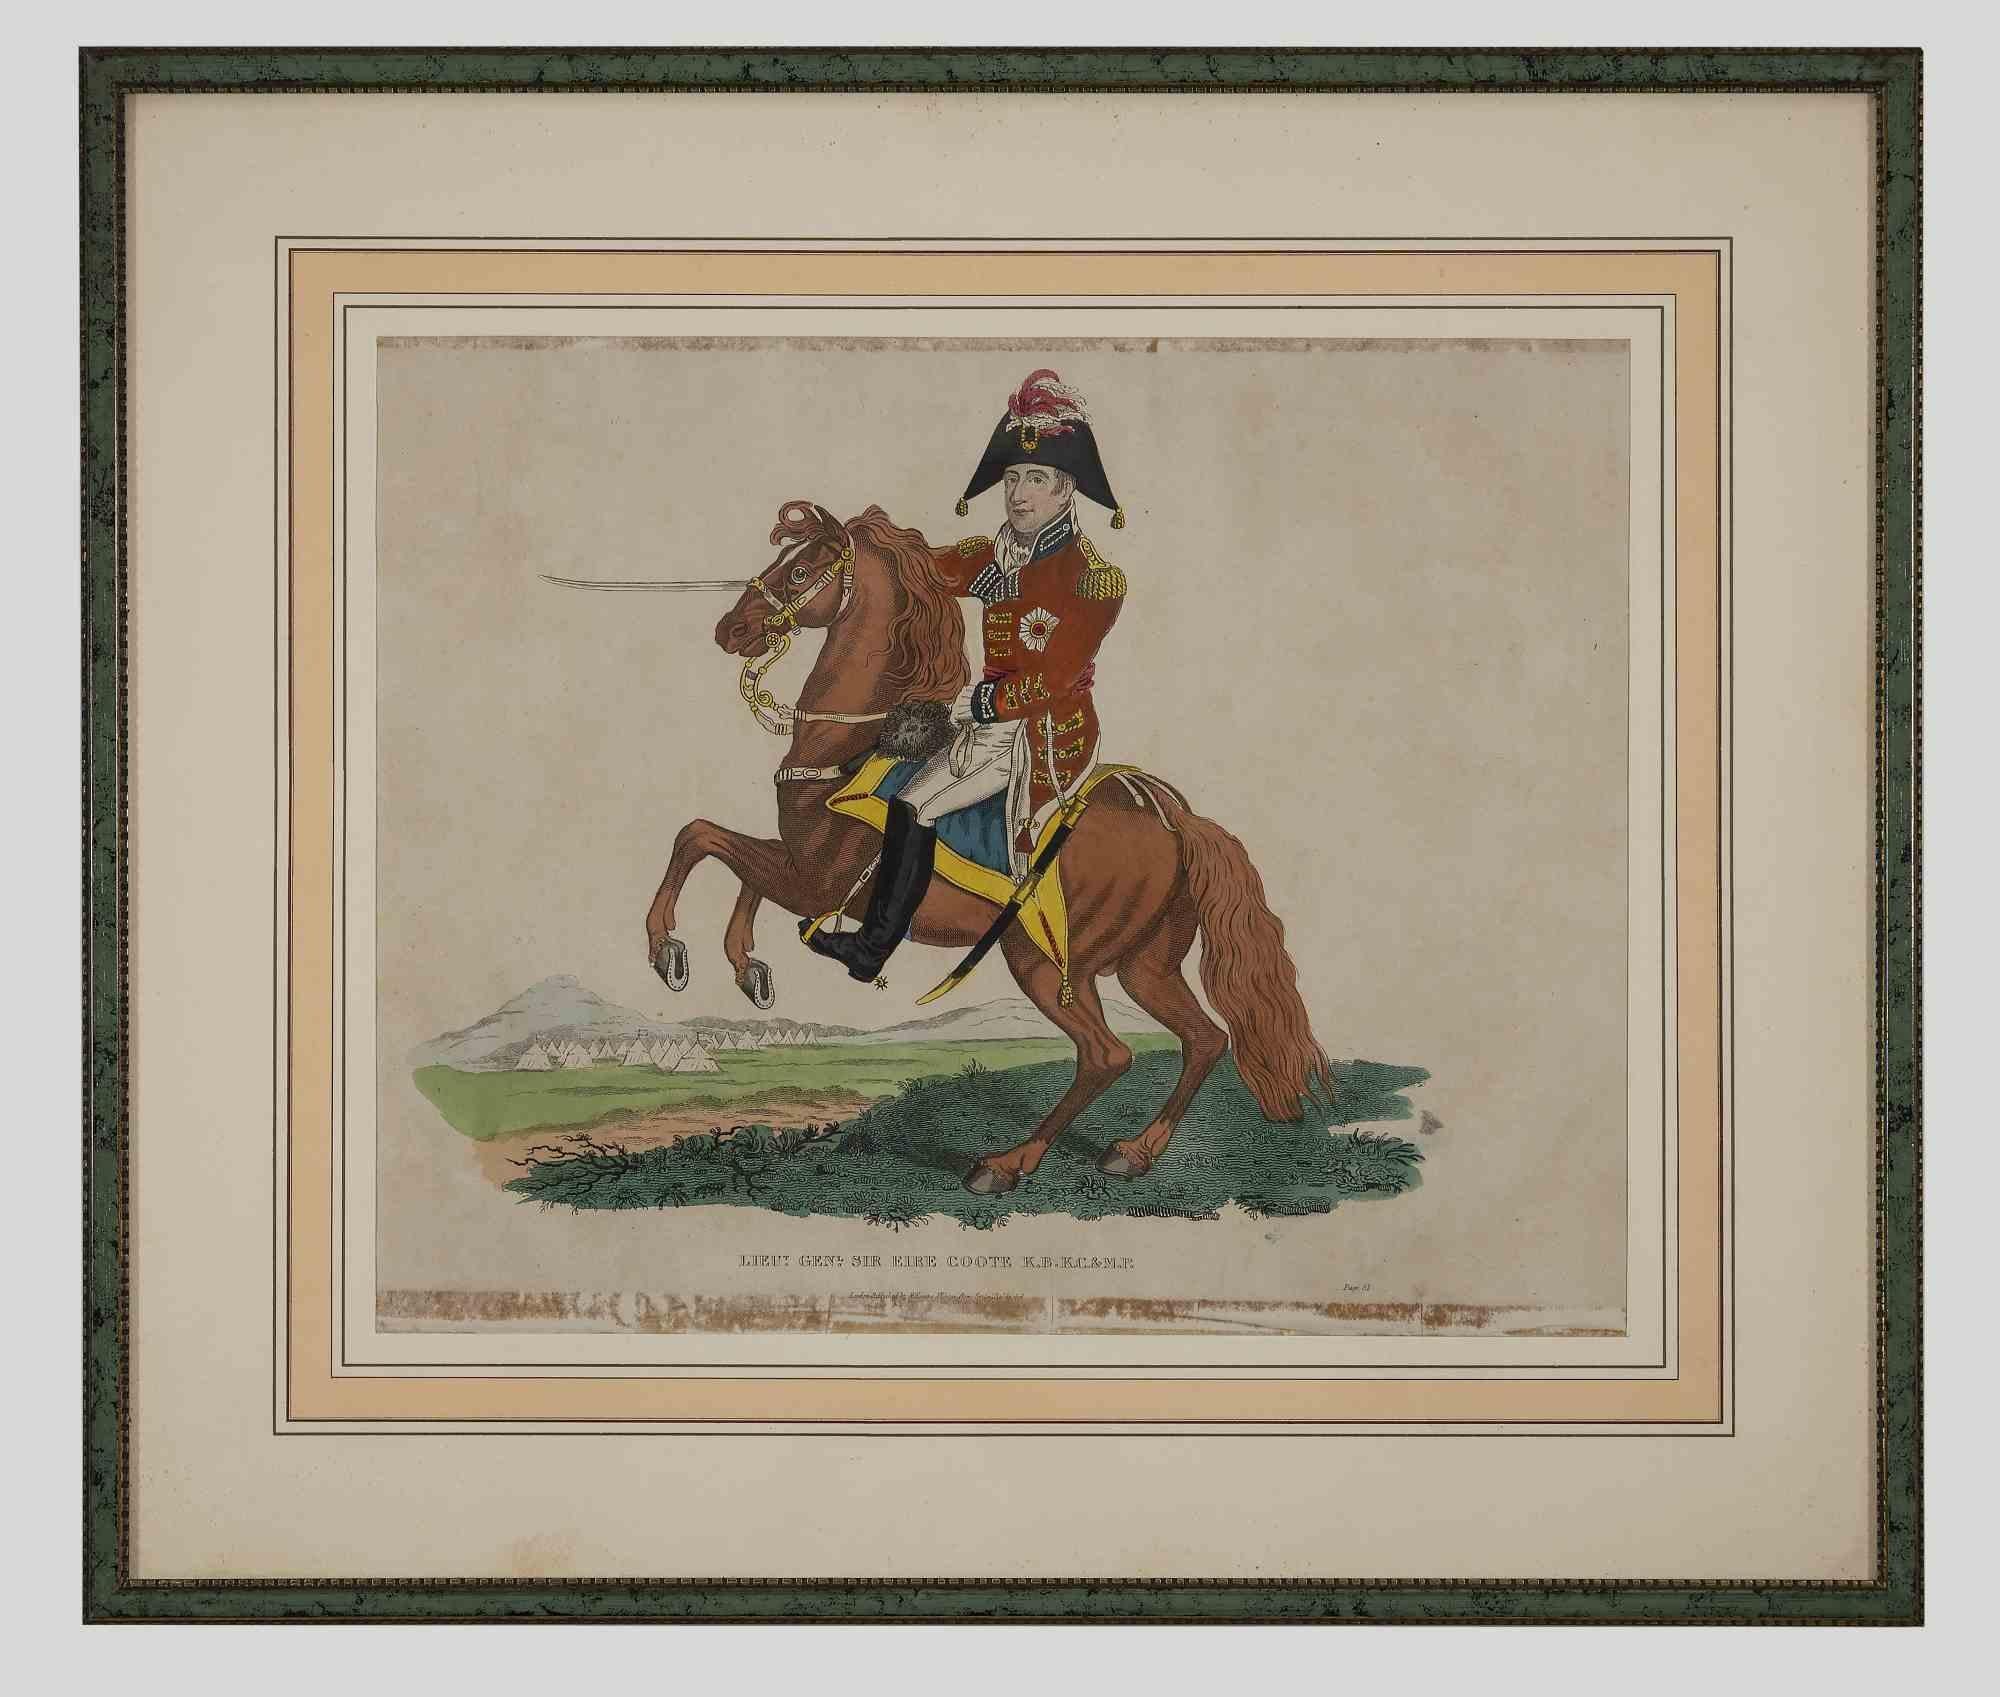 General Sir Eire Coote - Original Water-colored Lithograph - 1816